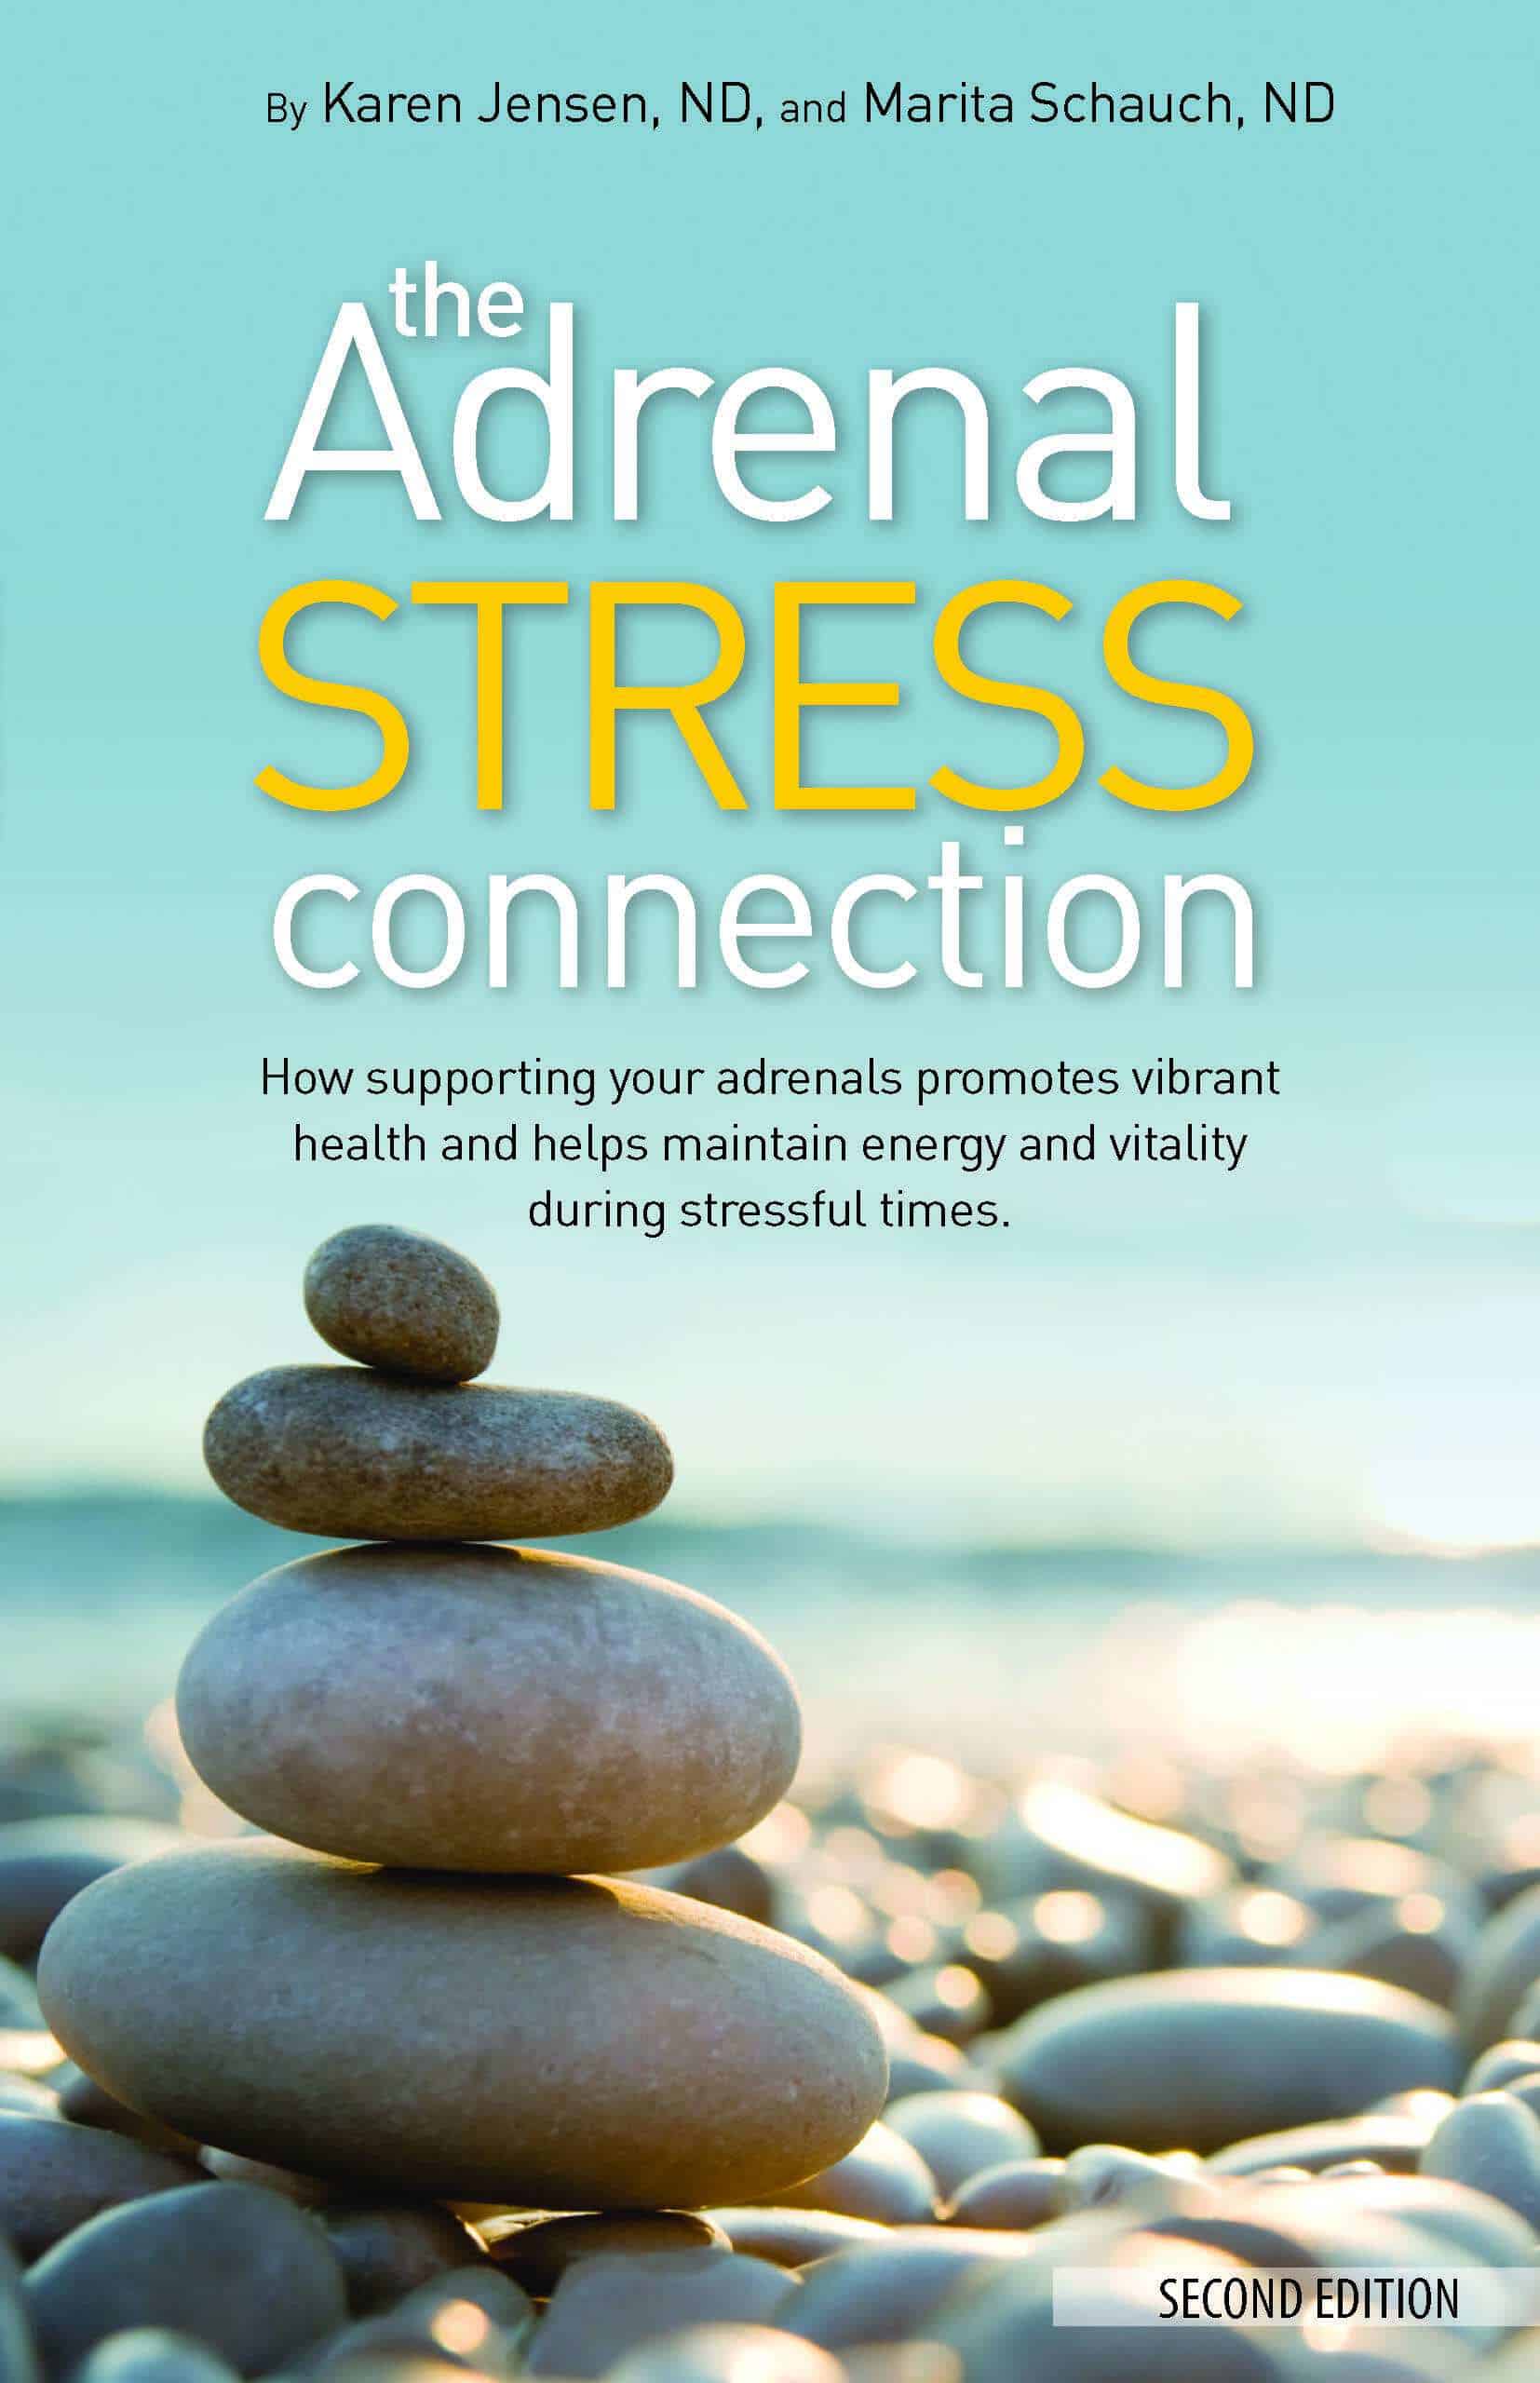 The Adrenal Stress Connection